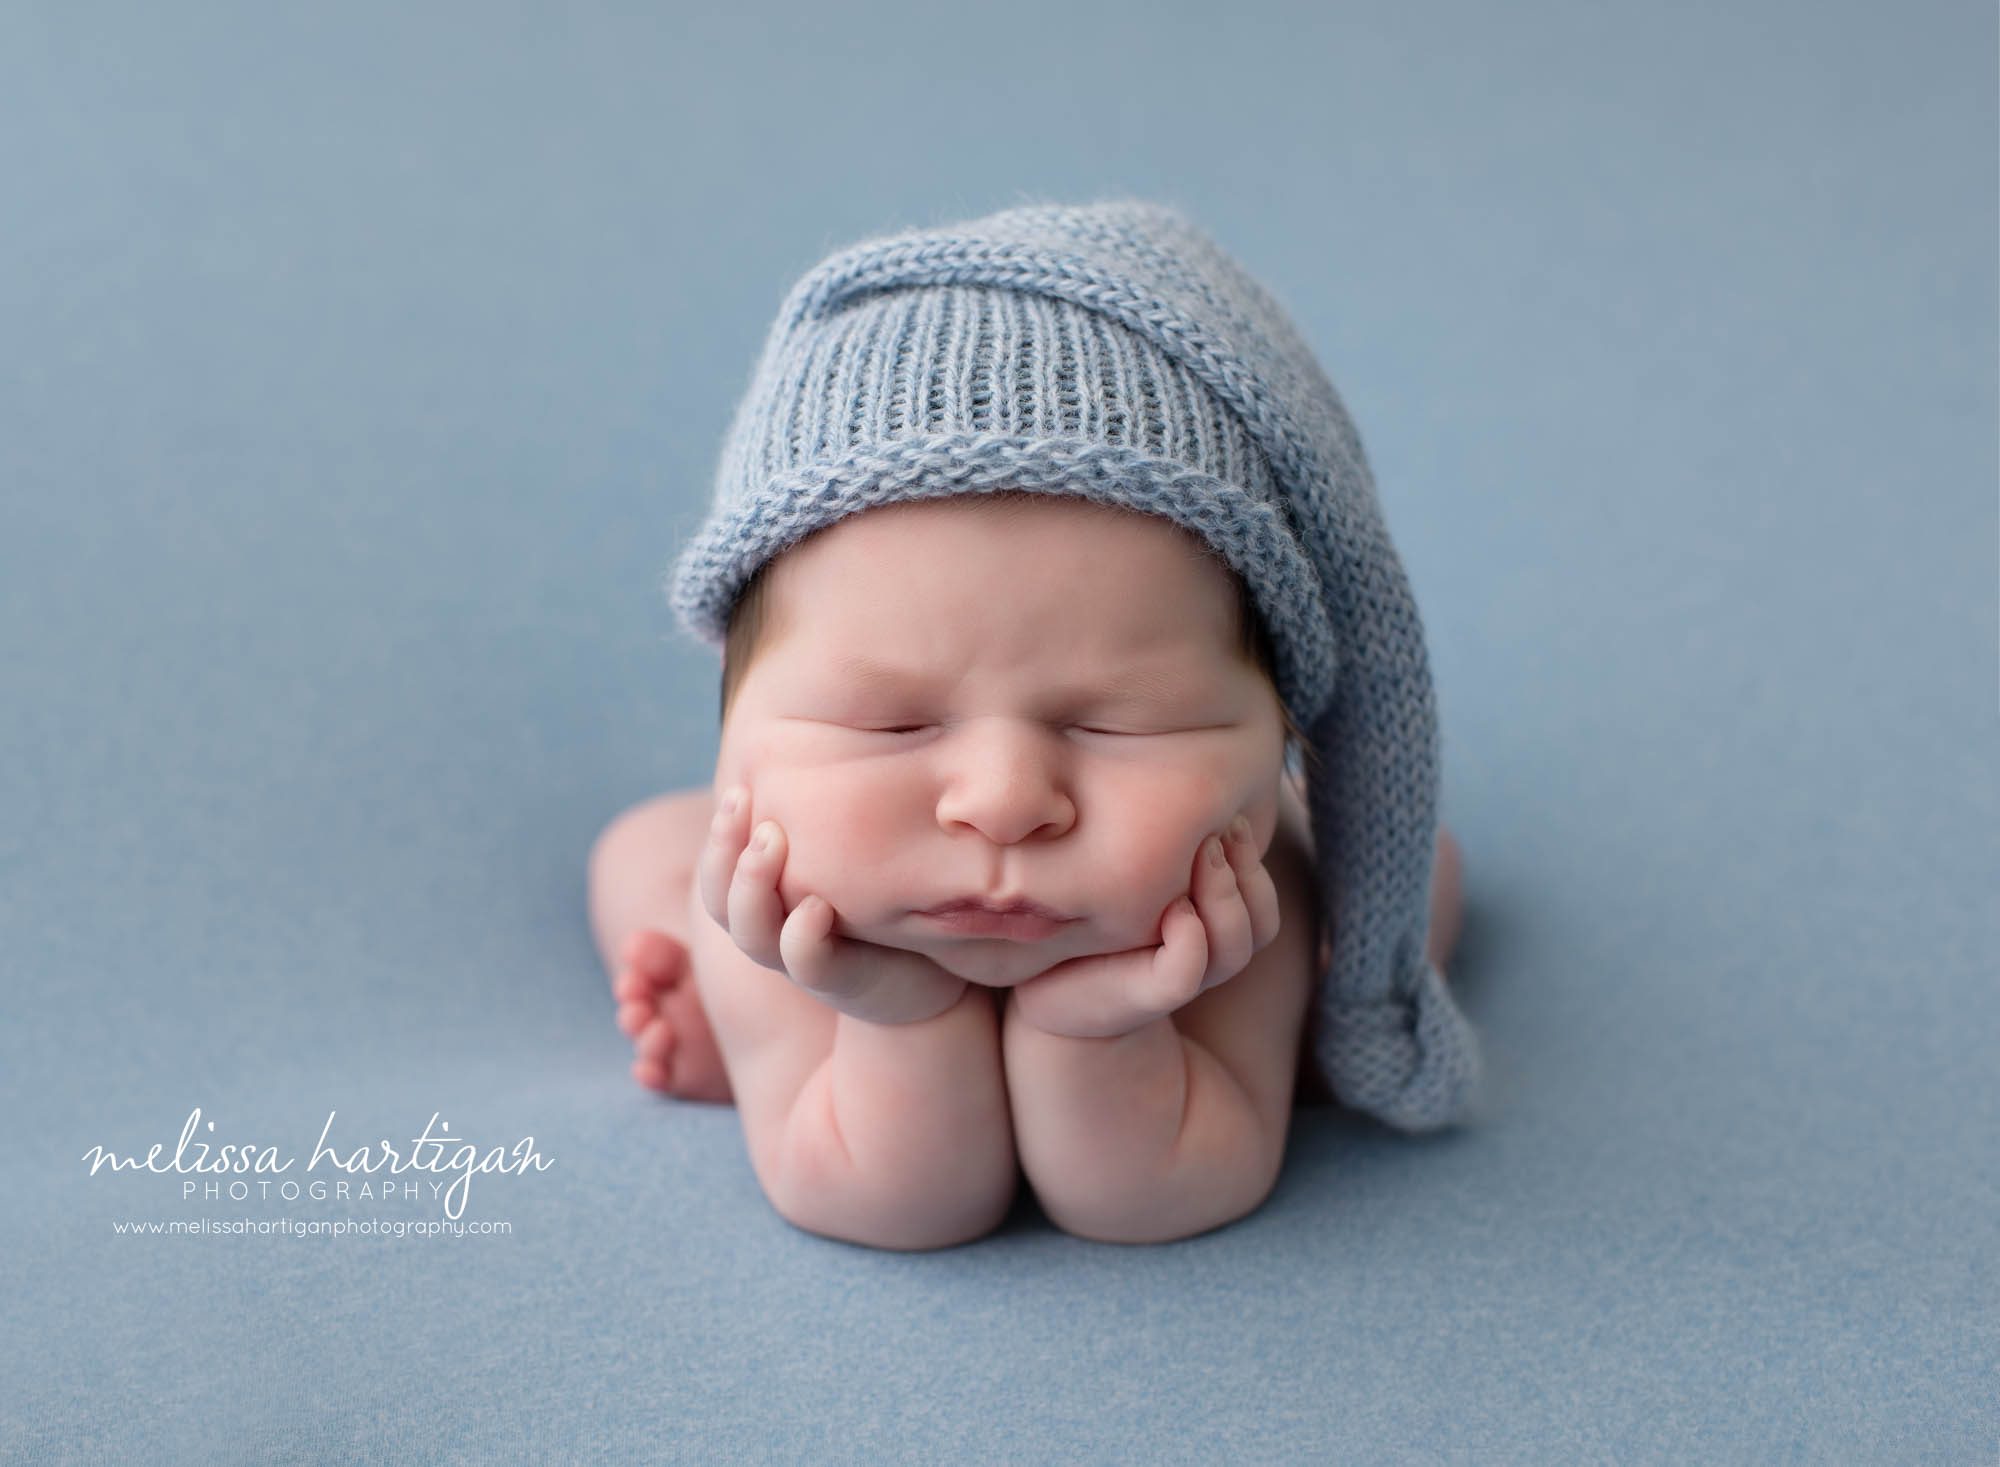 baby boy froggy pose on blue backdrop with knitted blue sleepy cap